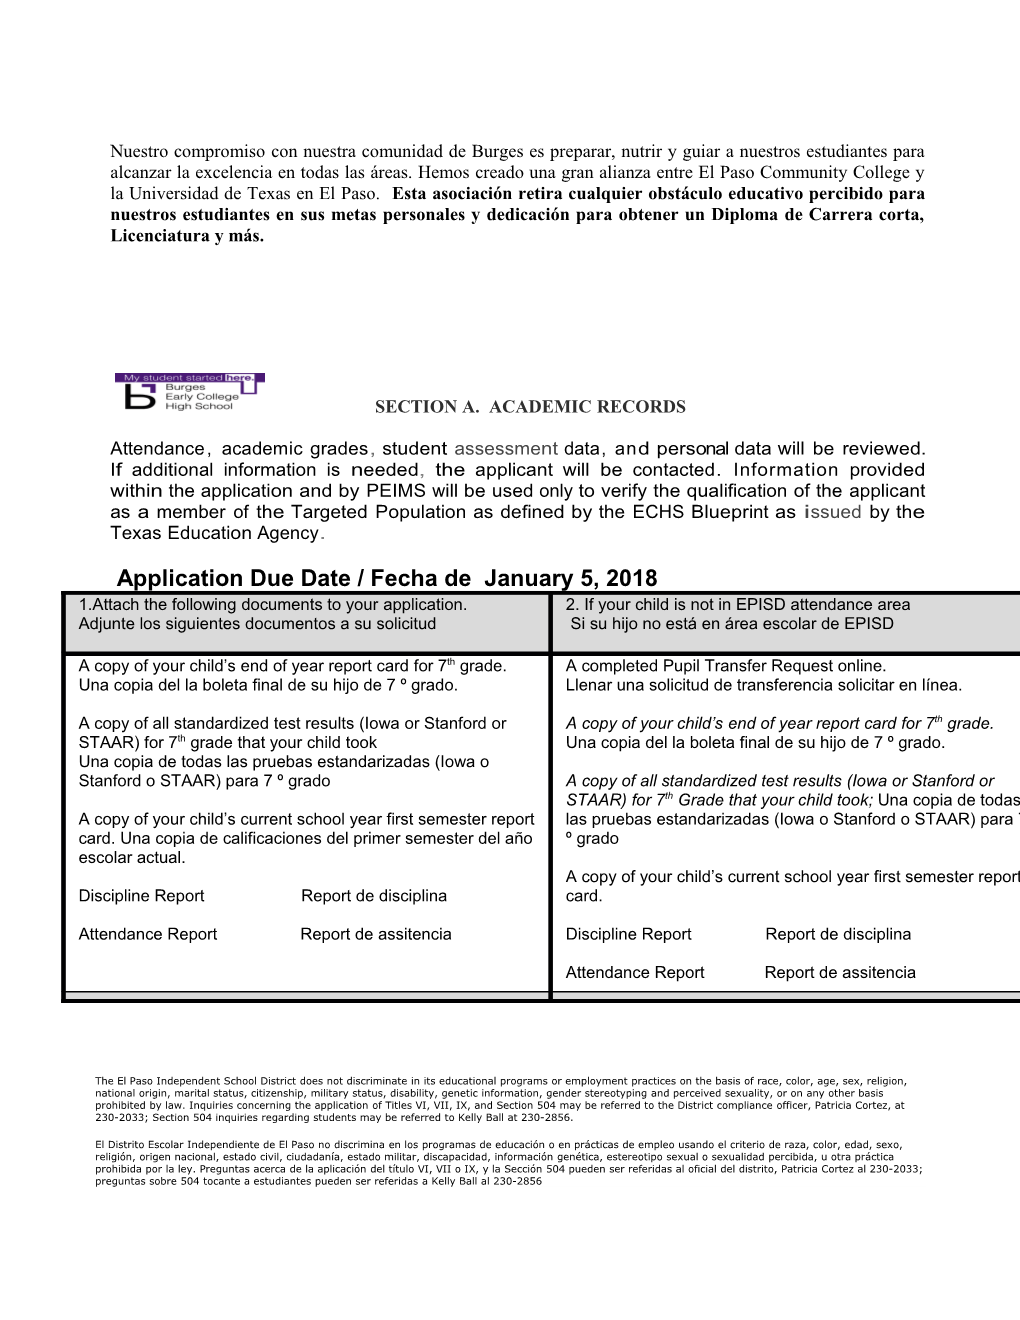 Burges Early College High School 20118-19Application for Admission